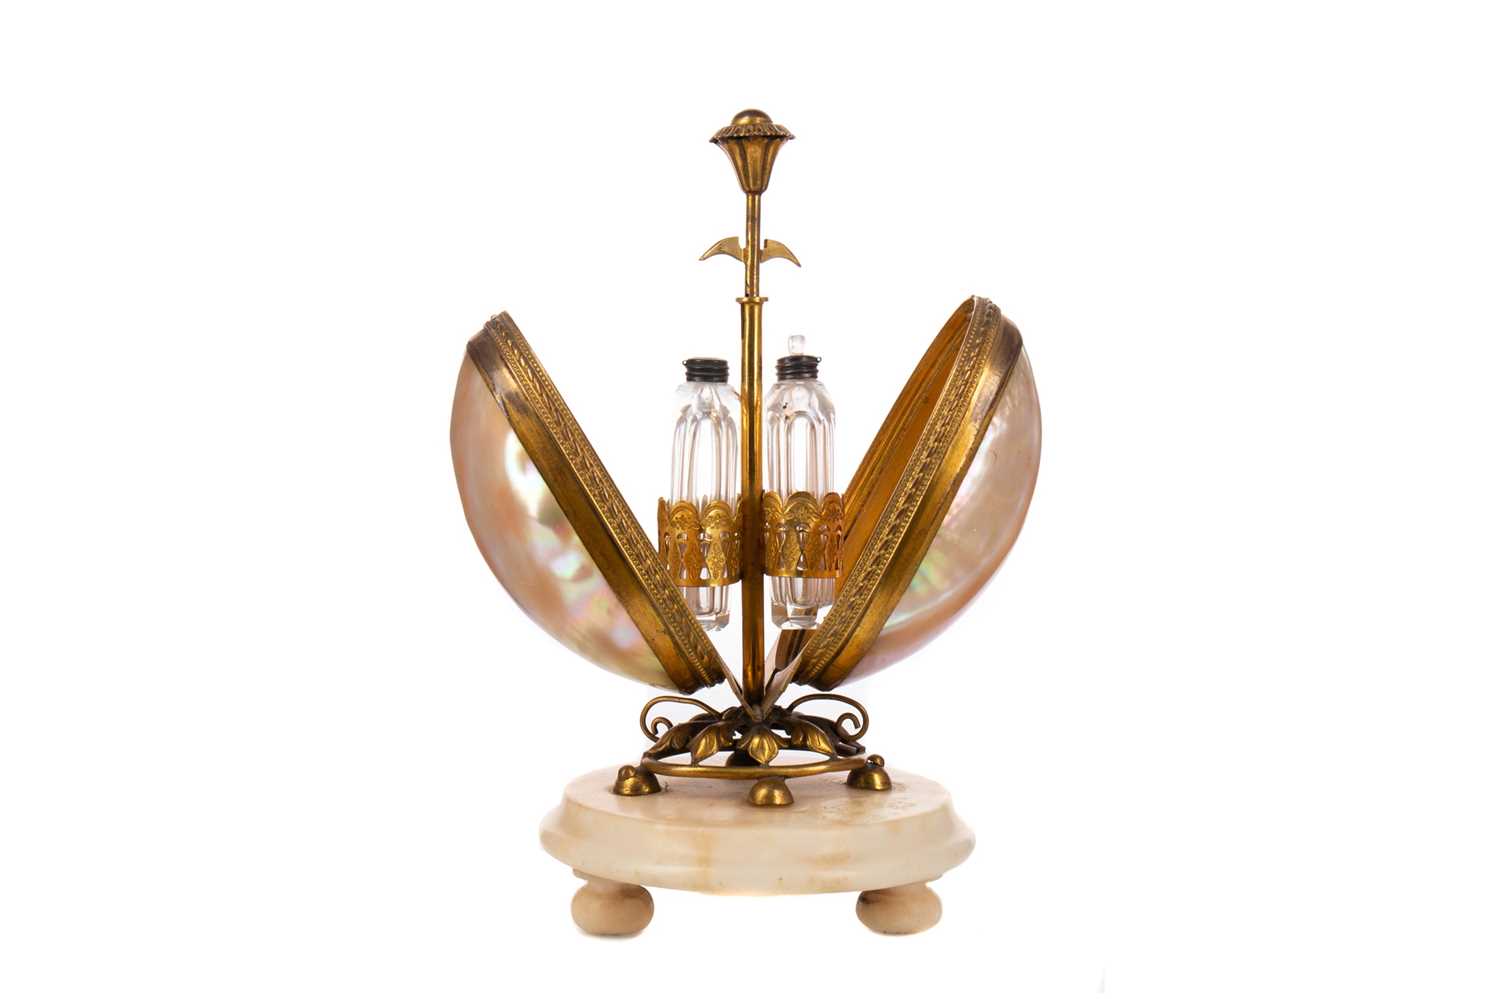 Lot 852 - A LATE 19TH CENTURY FRENCH PERFUME CADDY